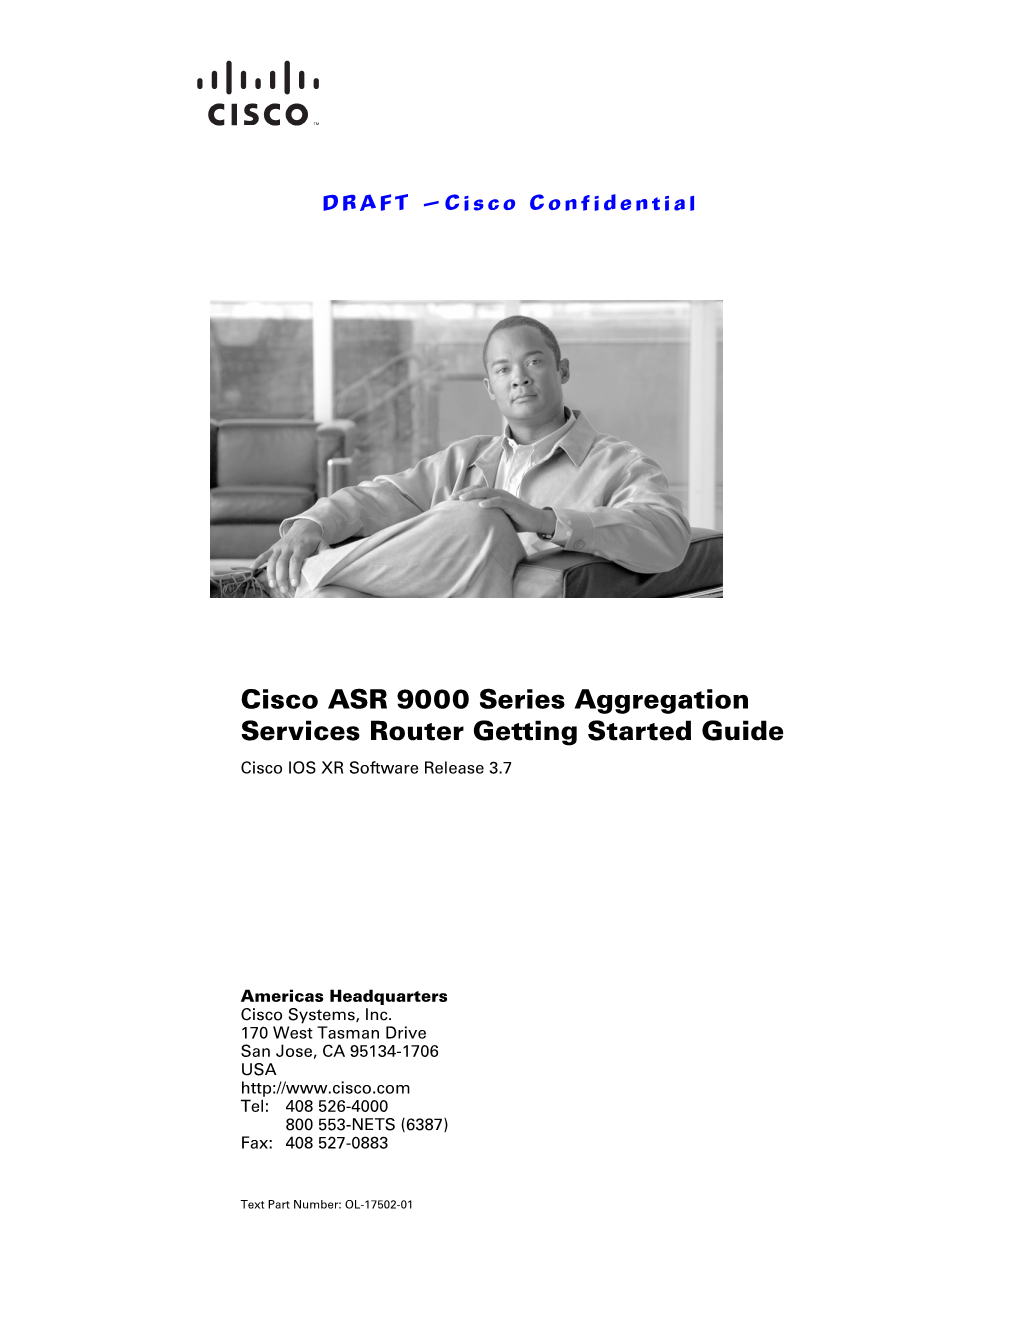 Cisco ASR 9000 Series Aggregation Services Router Getting Started Guide Cisco IOS XR Software Release 3.7